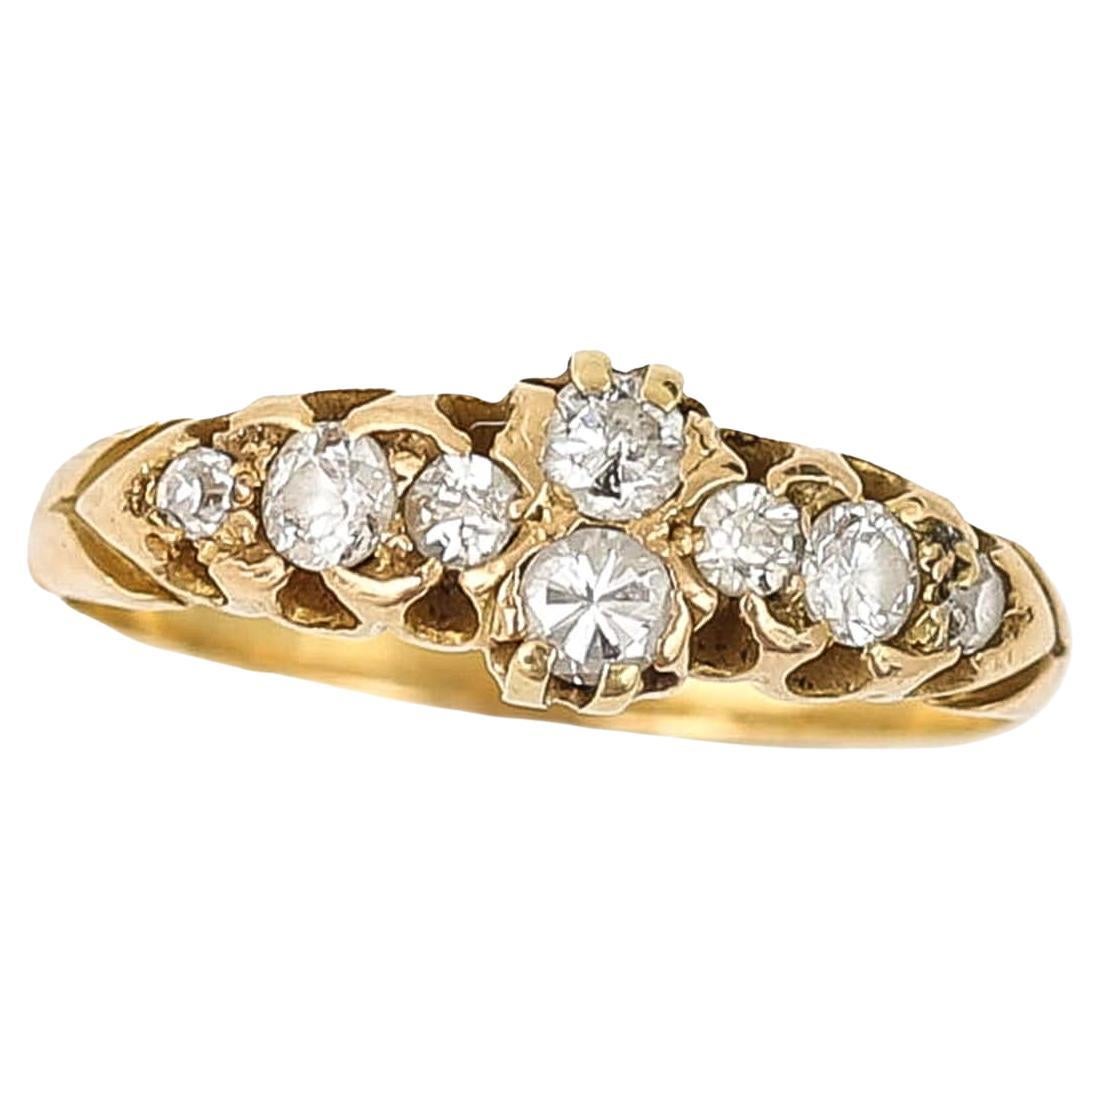 Early 20th Century 18ct Gold European Cut Diamond Band Ring Circa 1910  For Sale